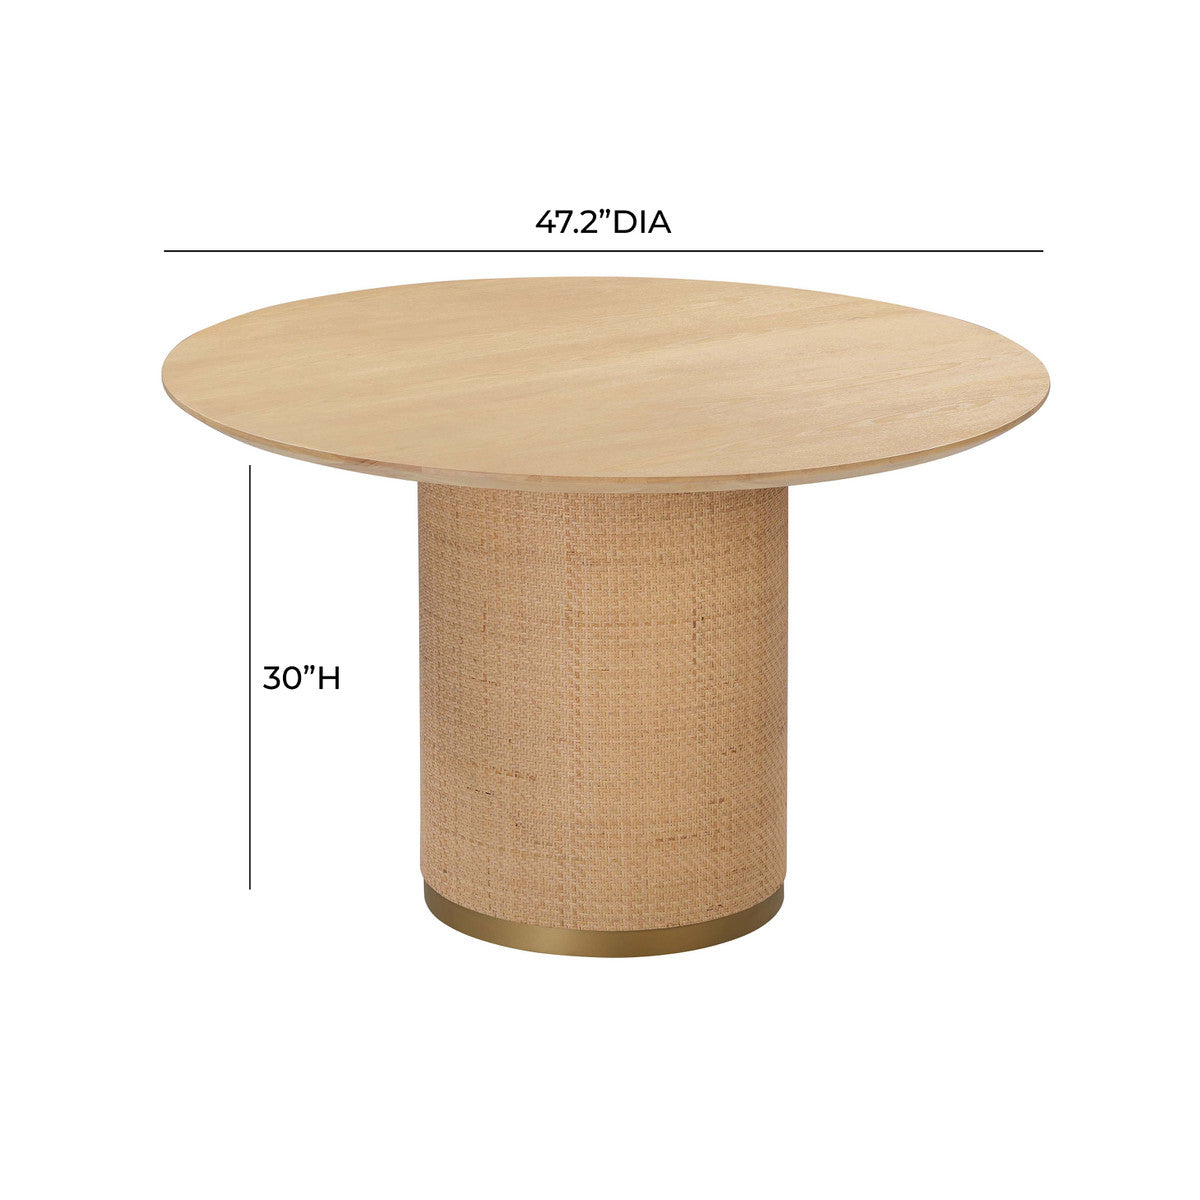 Nomad Wood and Rattan 49" Round Dining Table